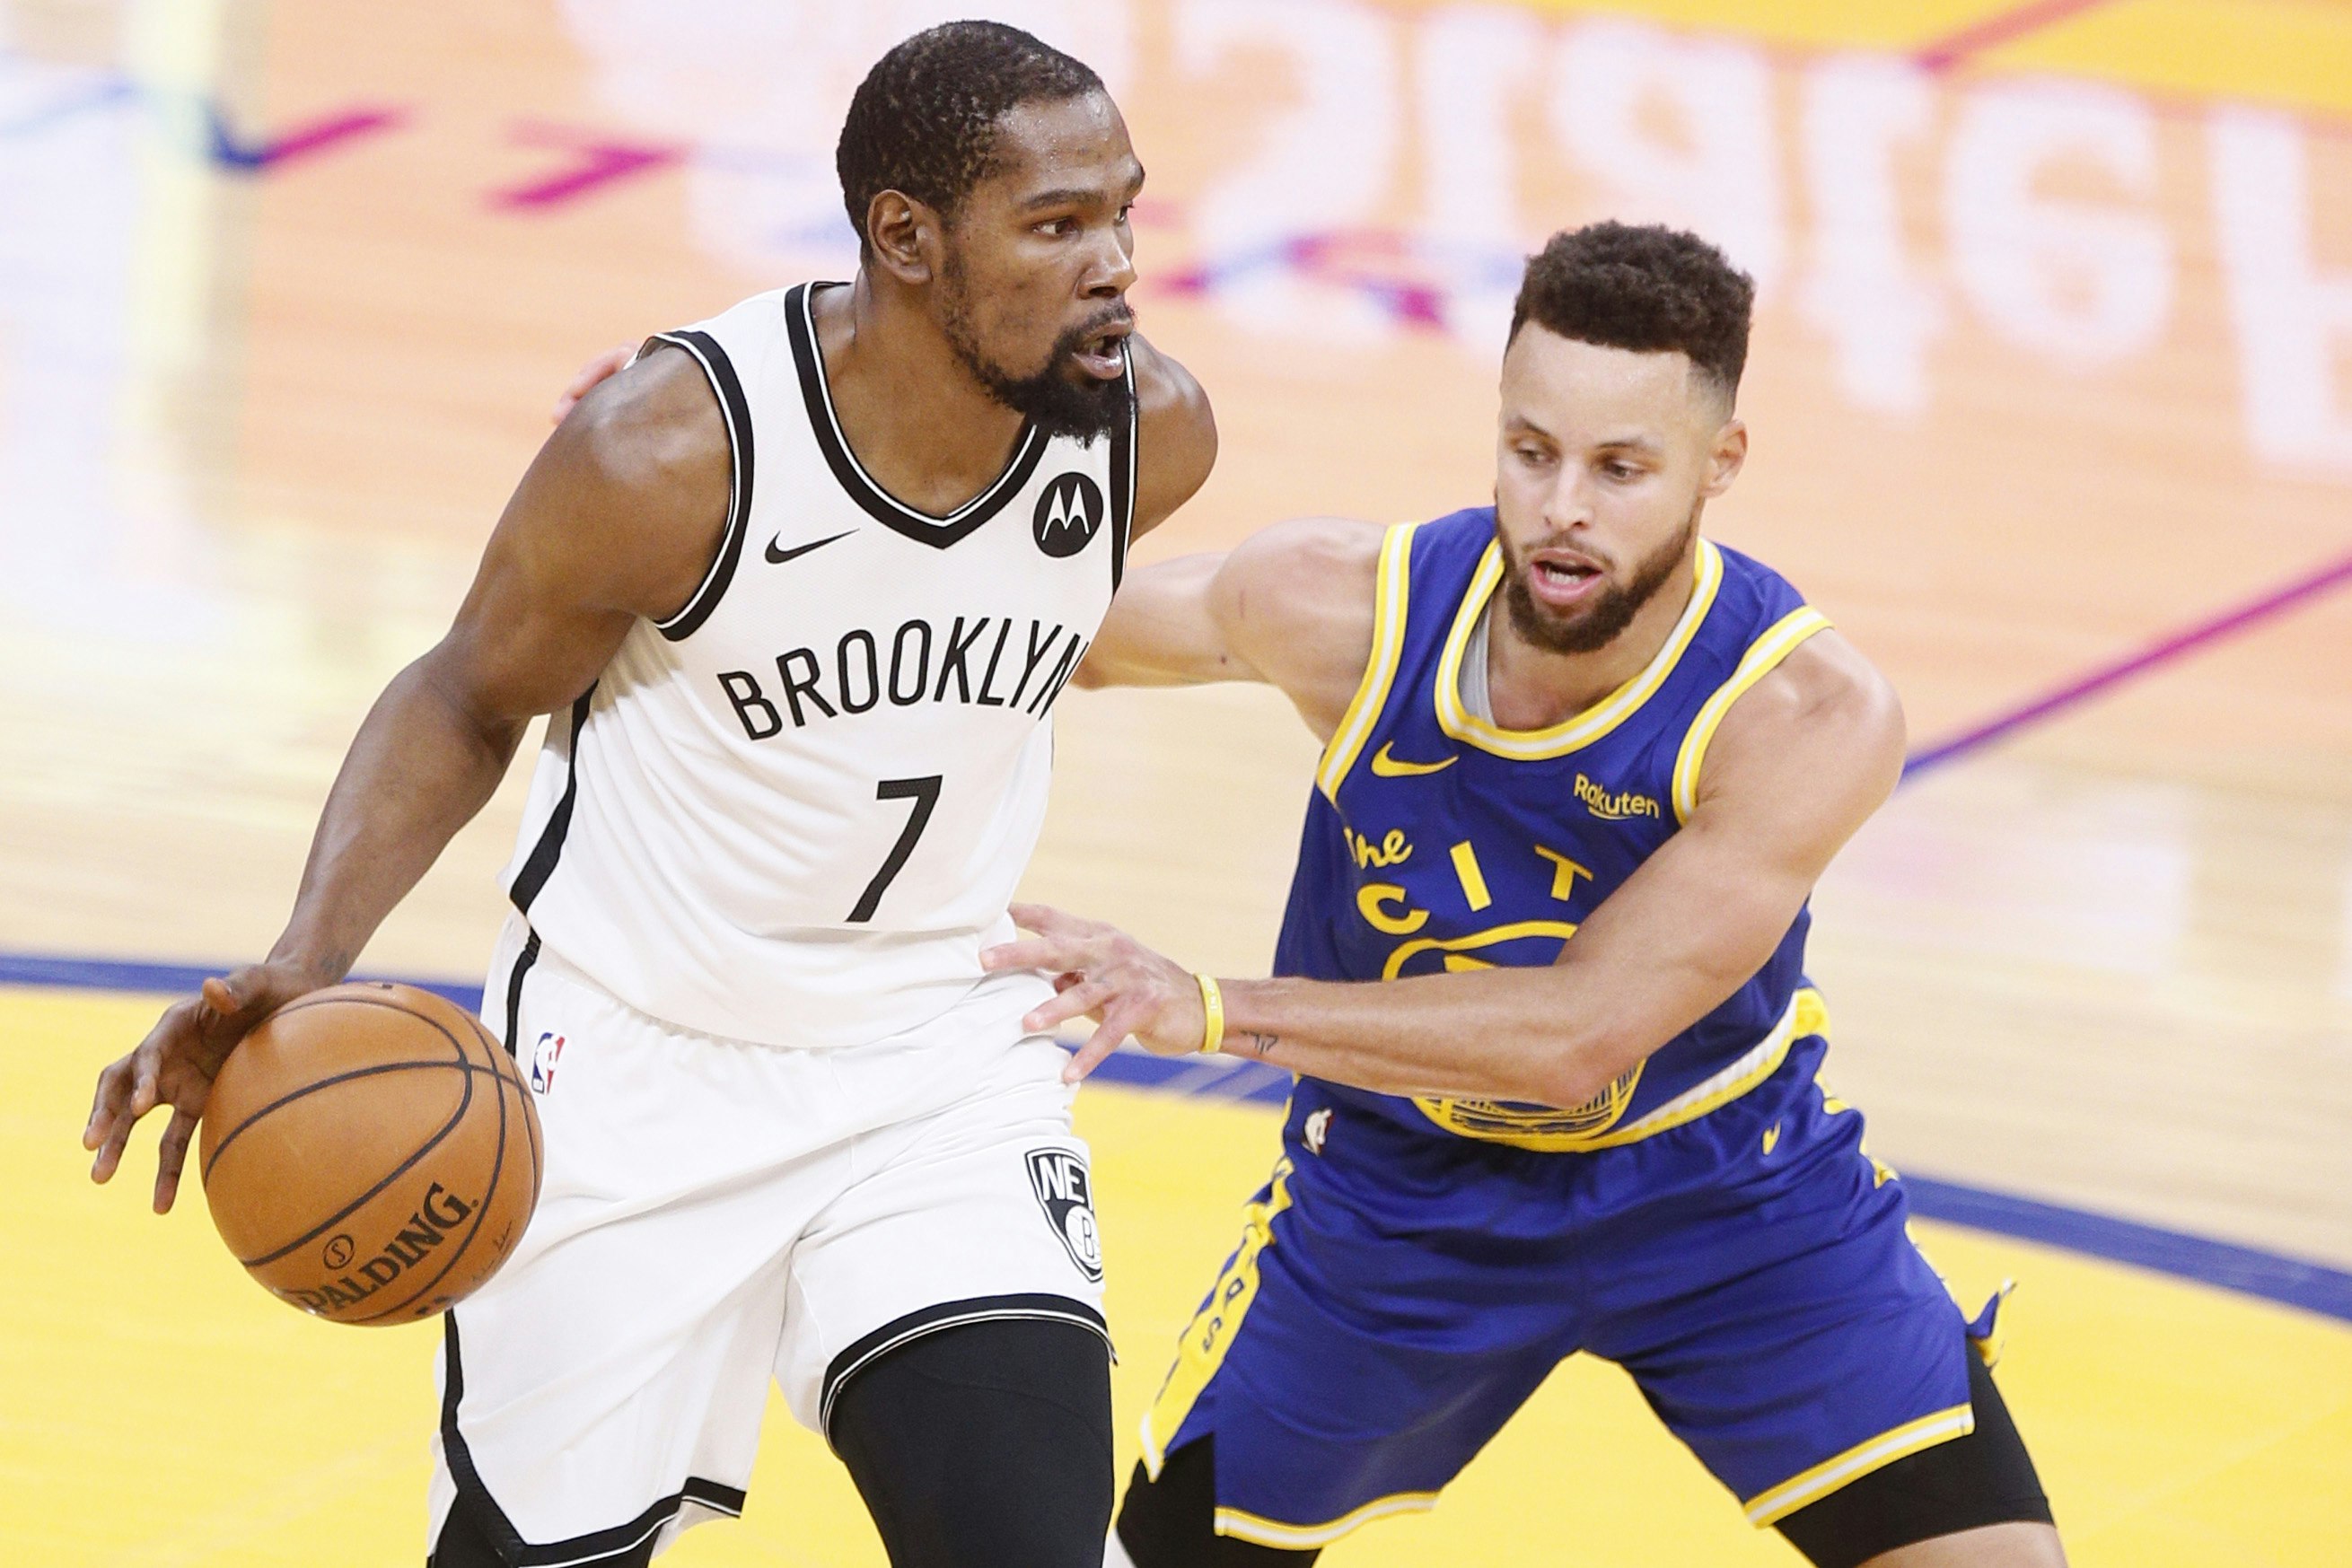 NBA: Brooklyn Nets vs Golden State Warriors. Kevin Durant i Stephen Curry